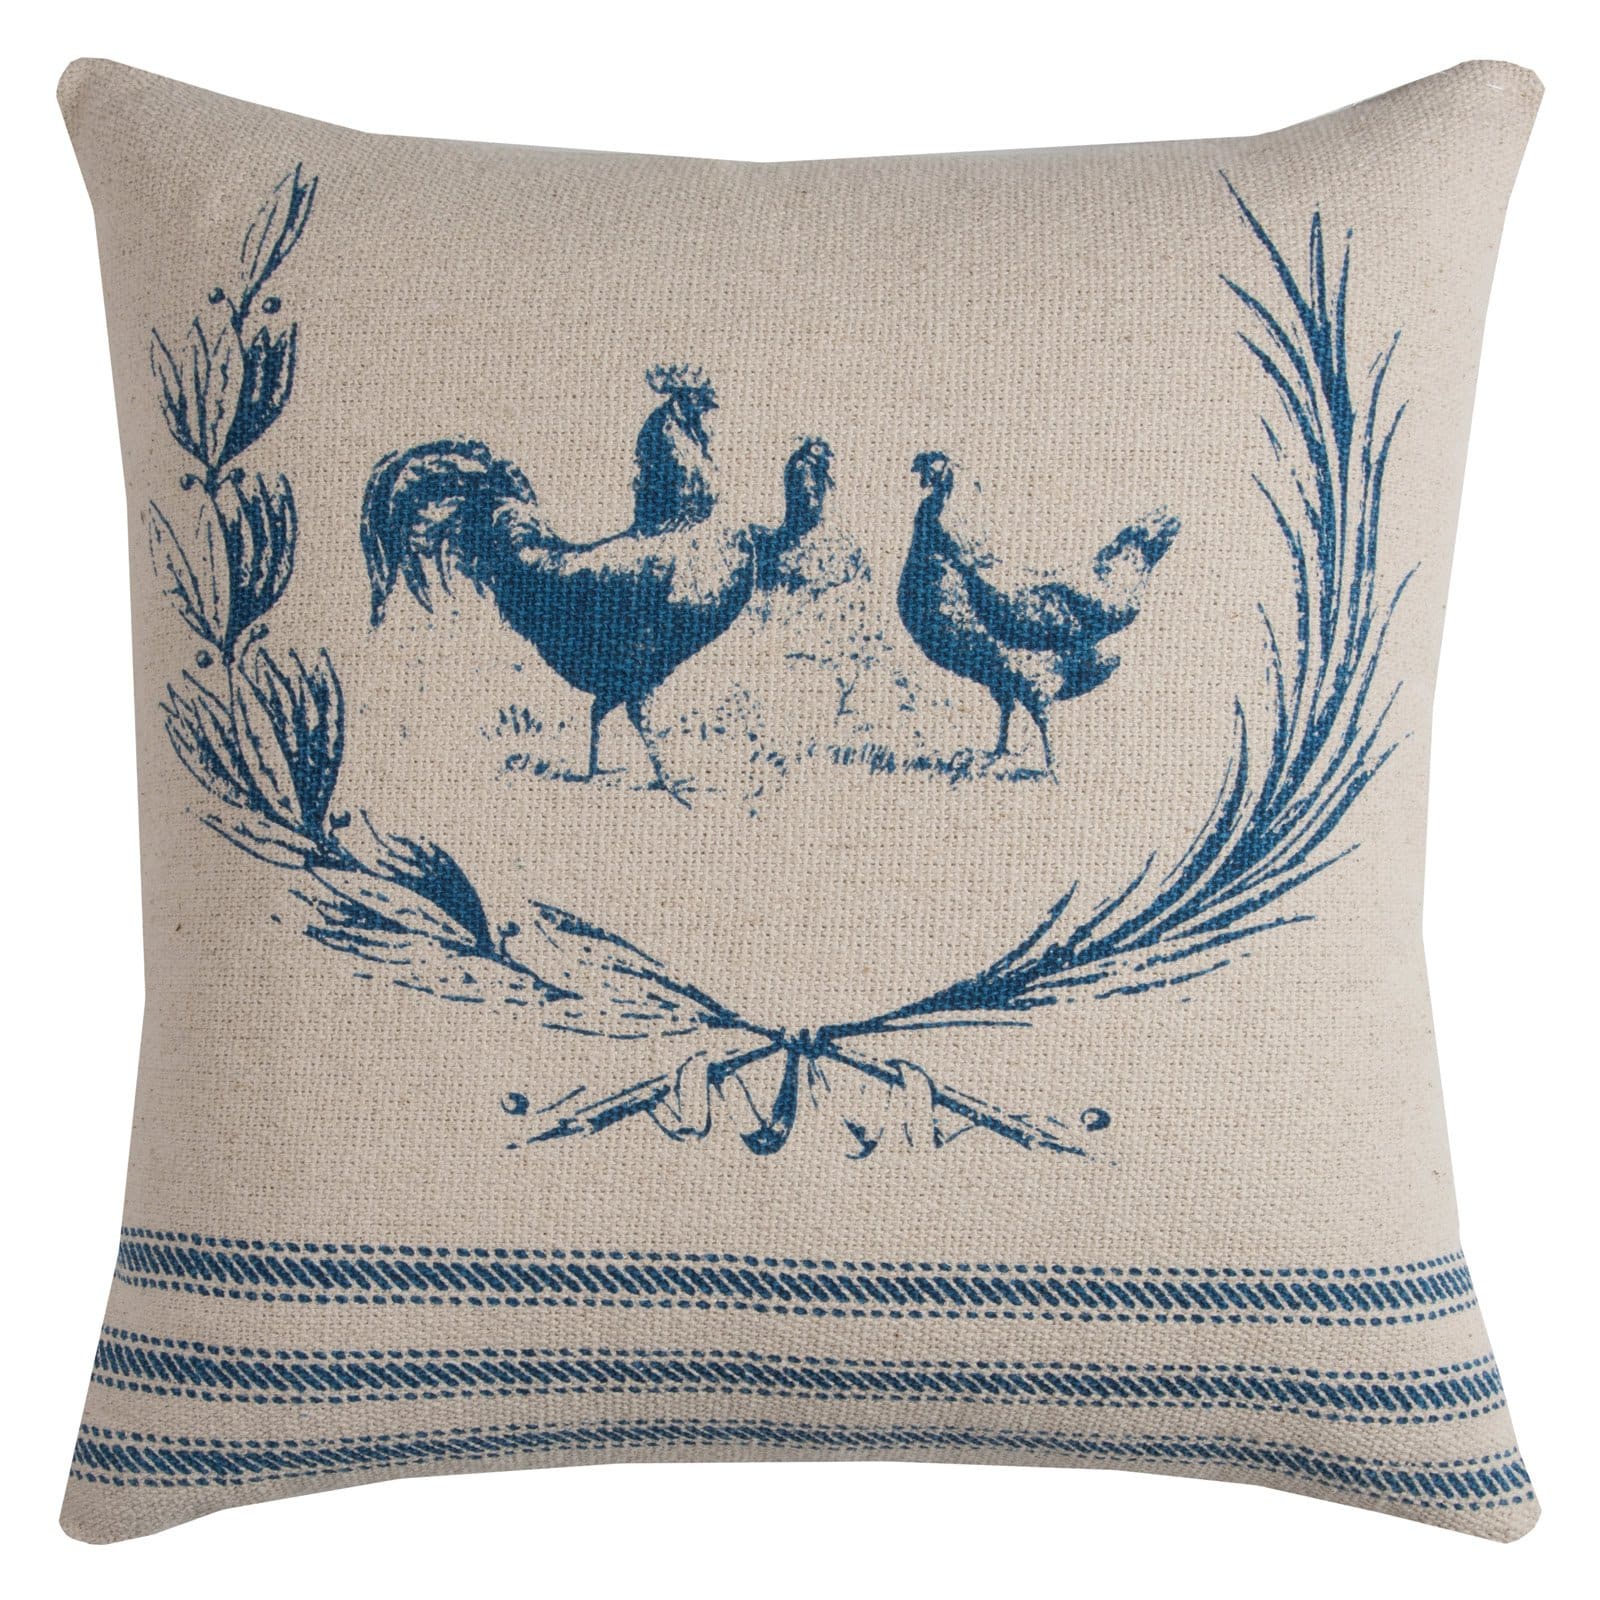 Rizzy Home Farmhouse Rooster Cotton With Zipper Closer Decorative Throw Pillow, 20" x 20", Red - image 2 of 2